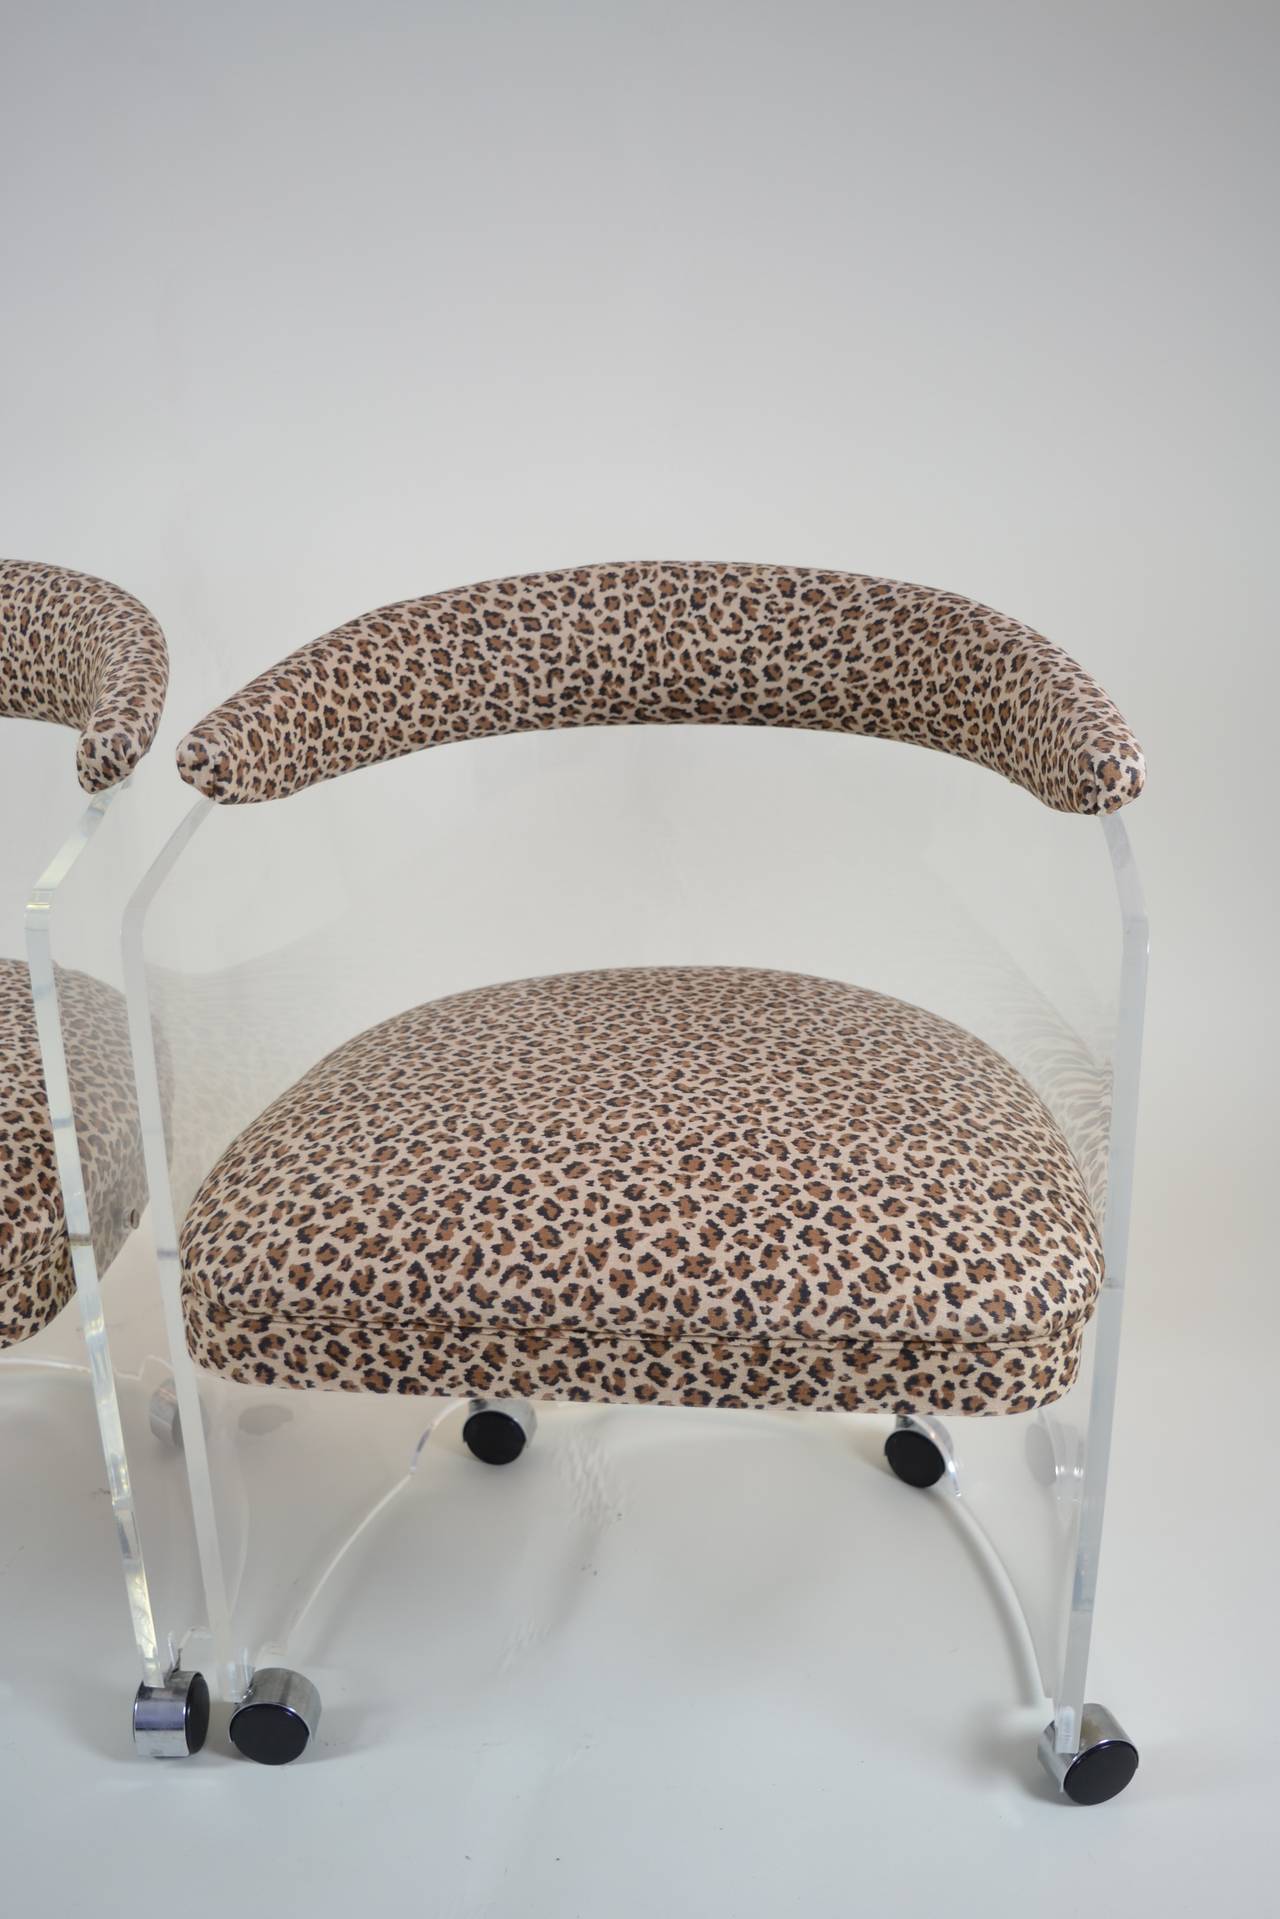 Pair of Lucite Barrel Chairs with Leopard Print Seats 1